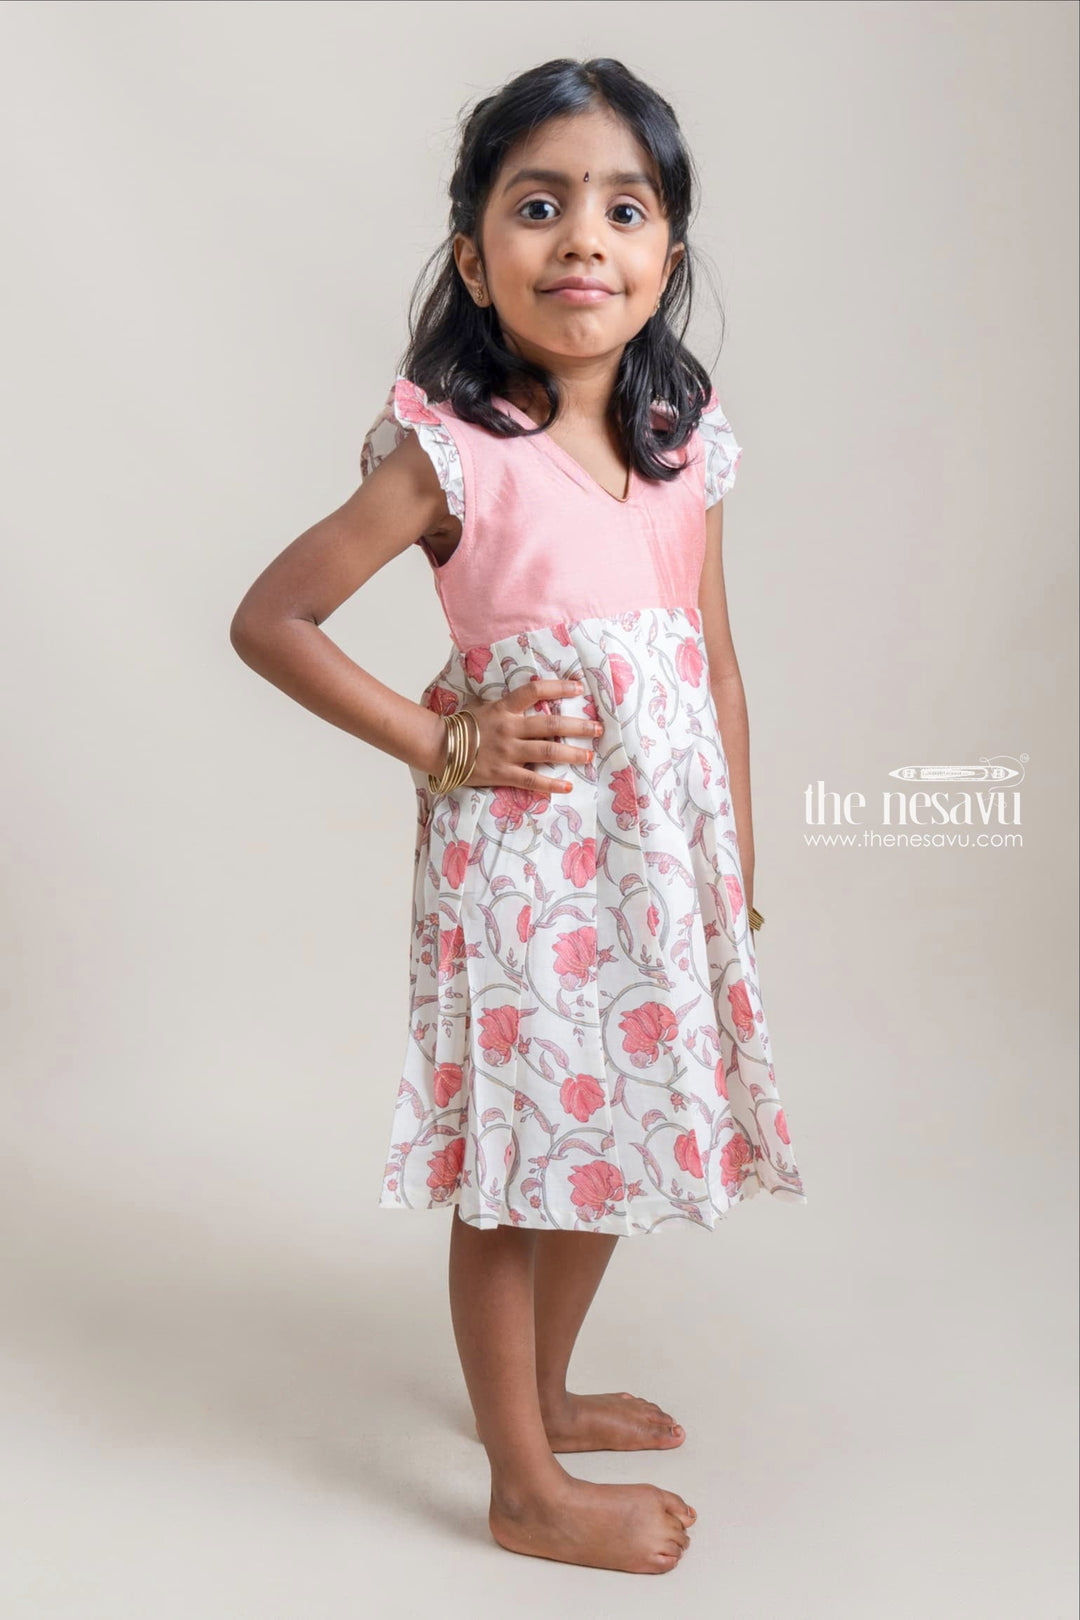 The Nesavu Girls Cotton Frock Charming Lite Pink And White Floral Printed Casual Cotton Frock For Girls Nesavu Lovely Pink Floral Cotton Frocks | New Girls Collection | The Nesavu